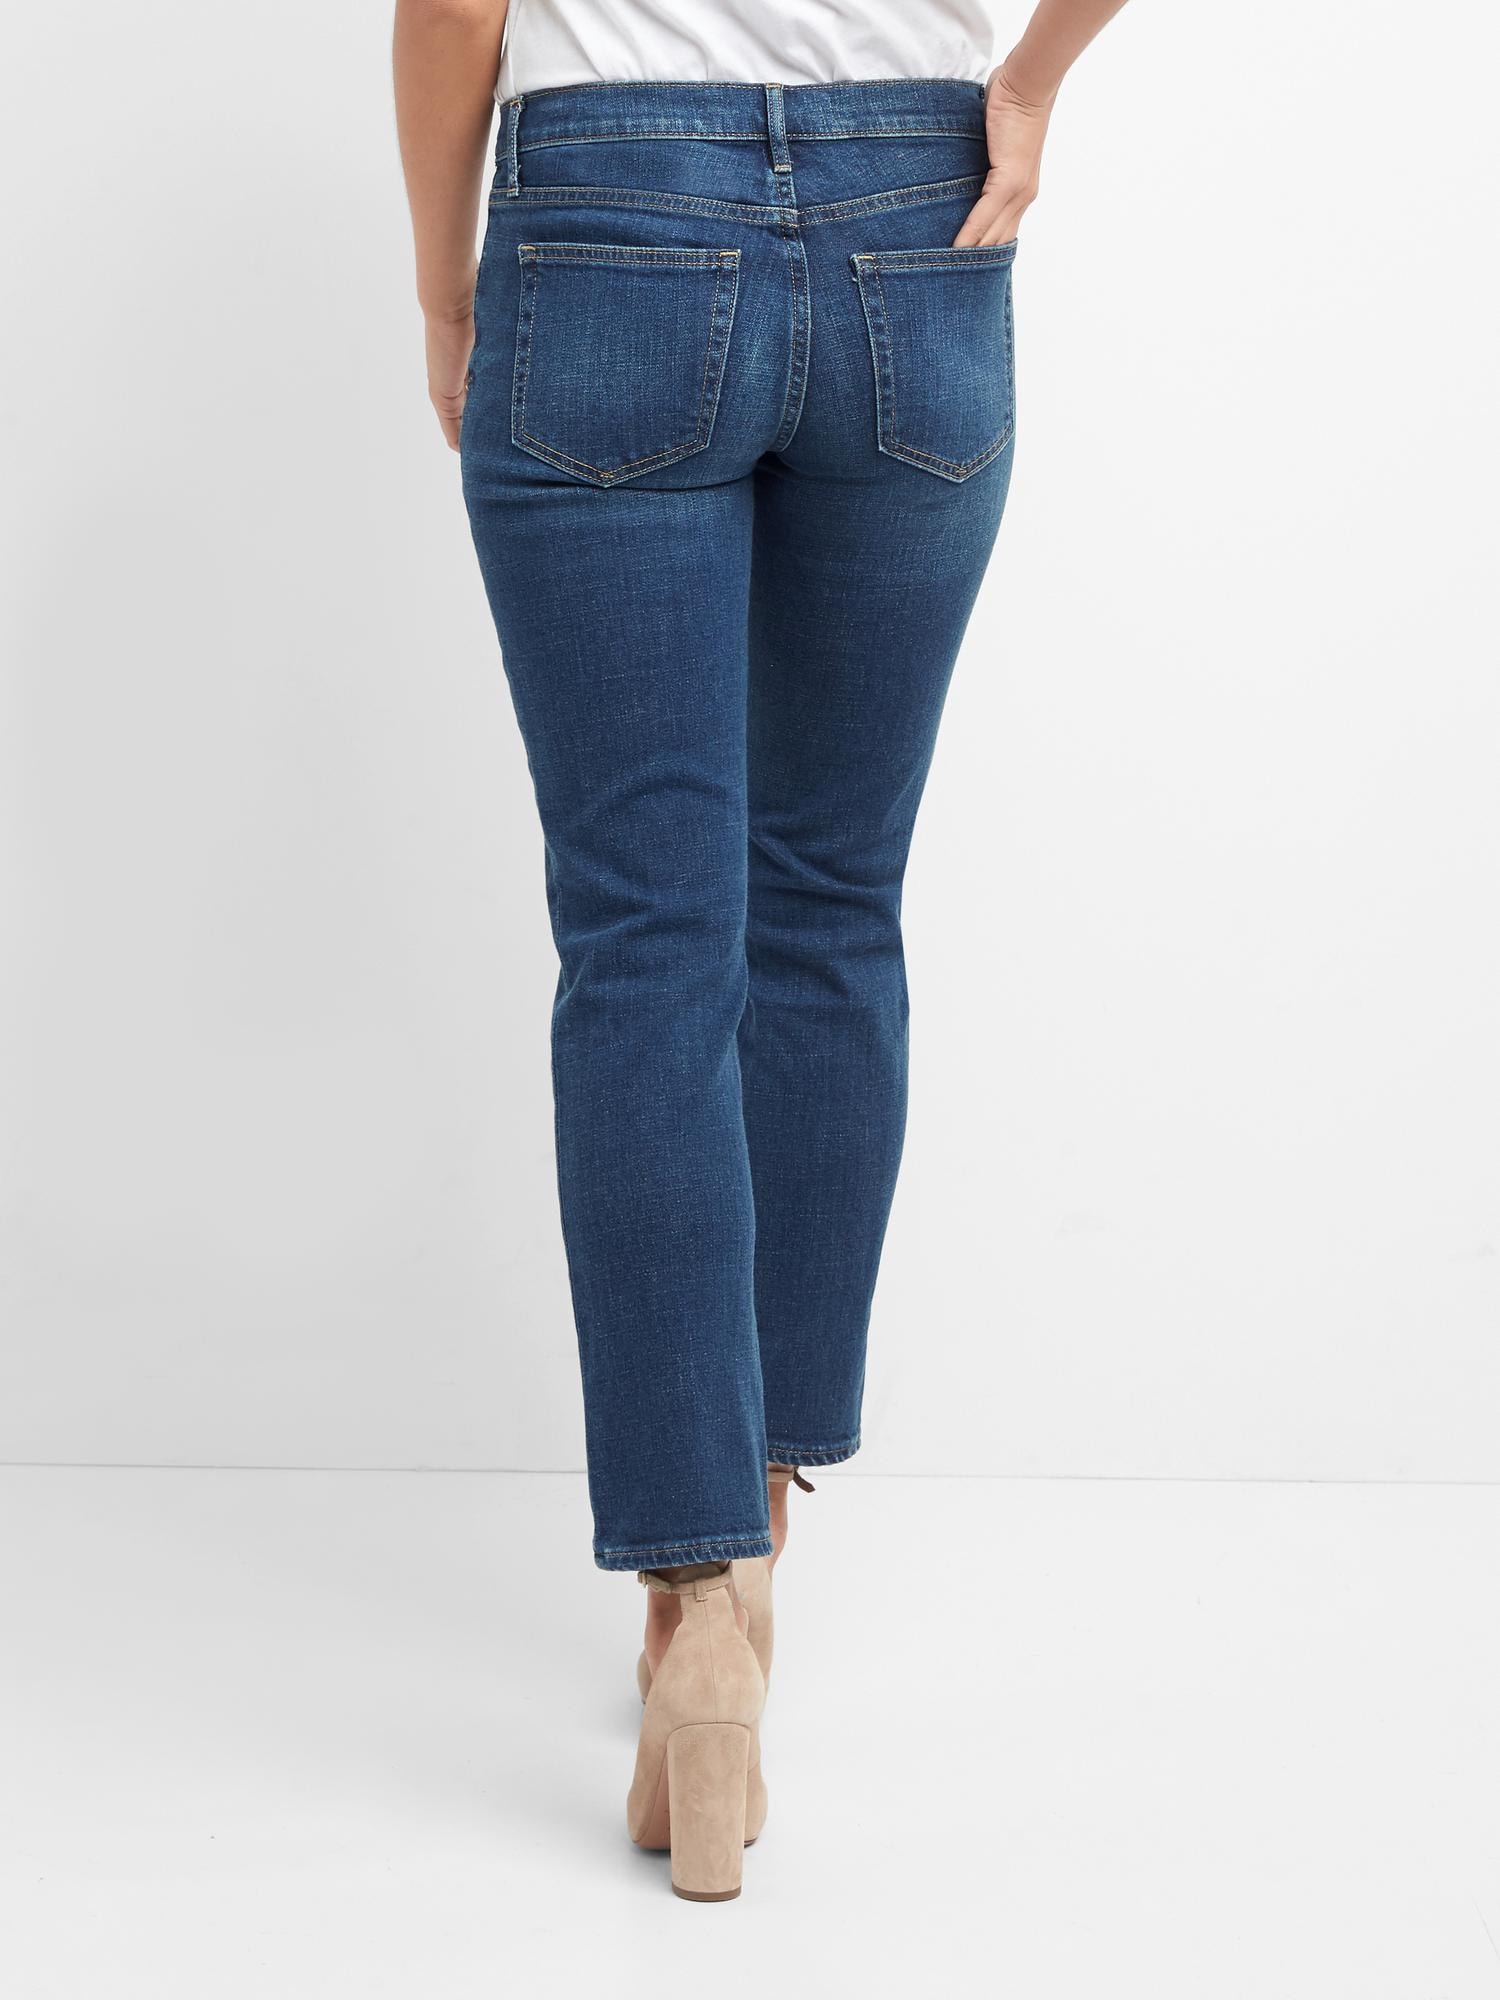 Gap Jeans Women 29 Mid Rise Real Straight Blue Stretch